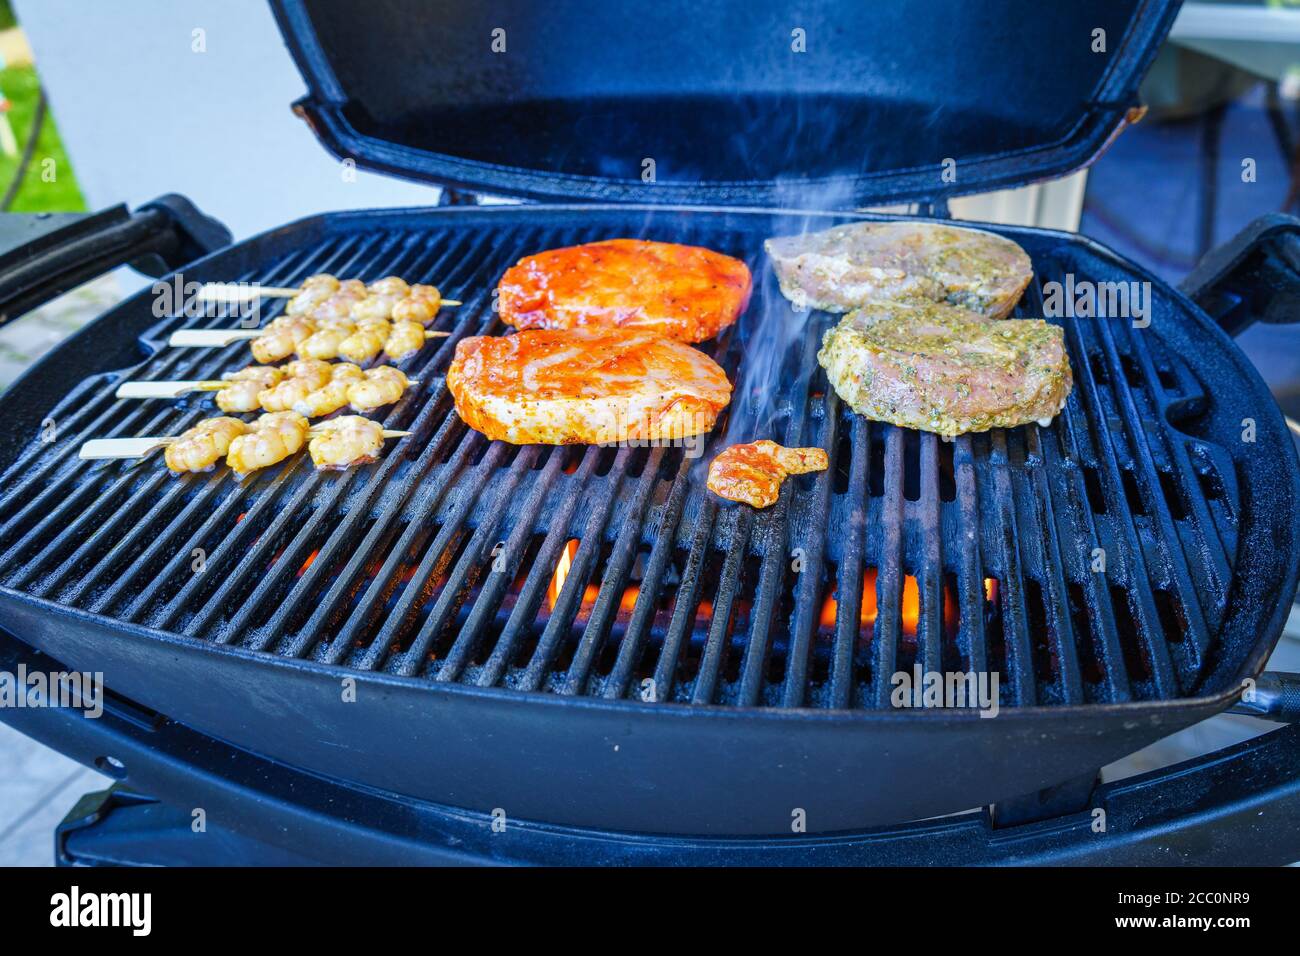 Grilling Steaks on a Gas Grill in Lower Bavaria Germany Stock Photo - Alamy